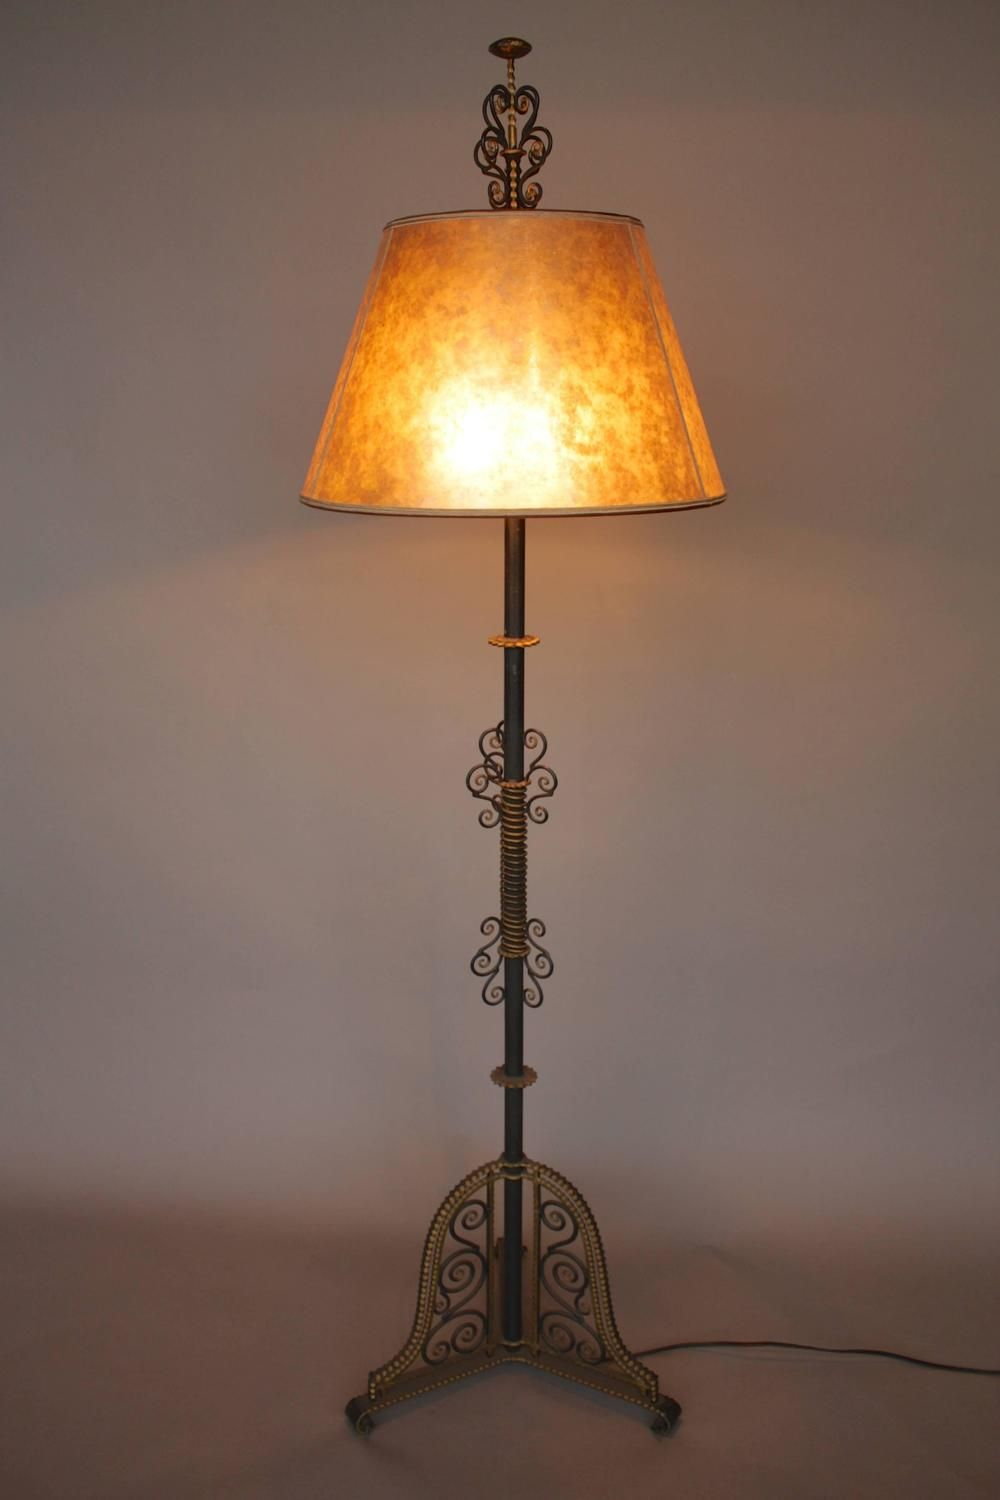 Spectacular Large Scale 1920s Spanish Revival Floor Lamp in size 1000 X 1500